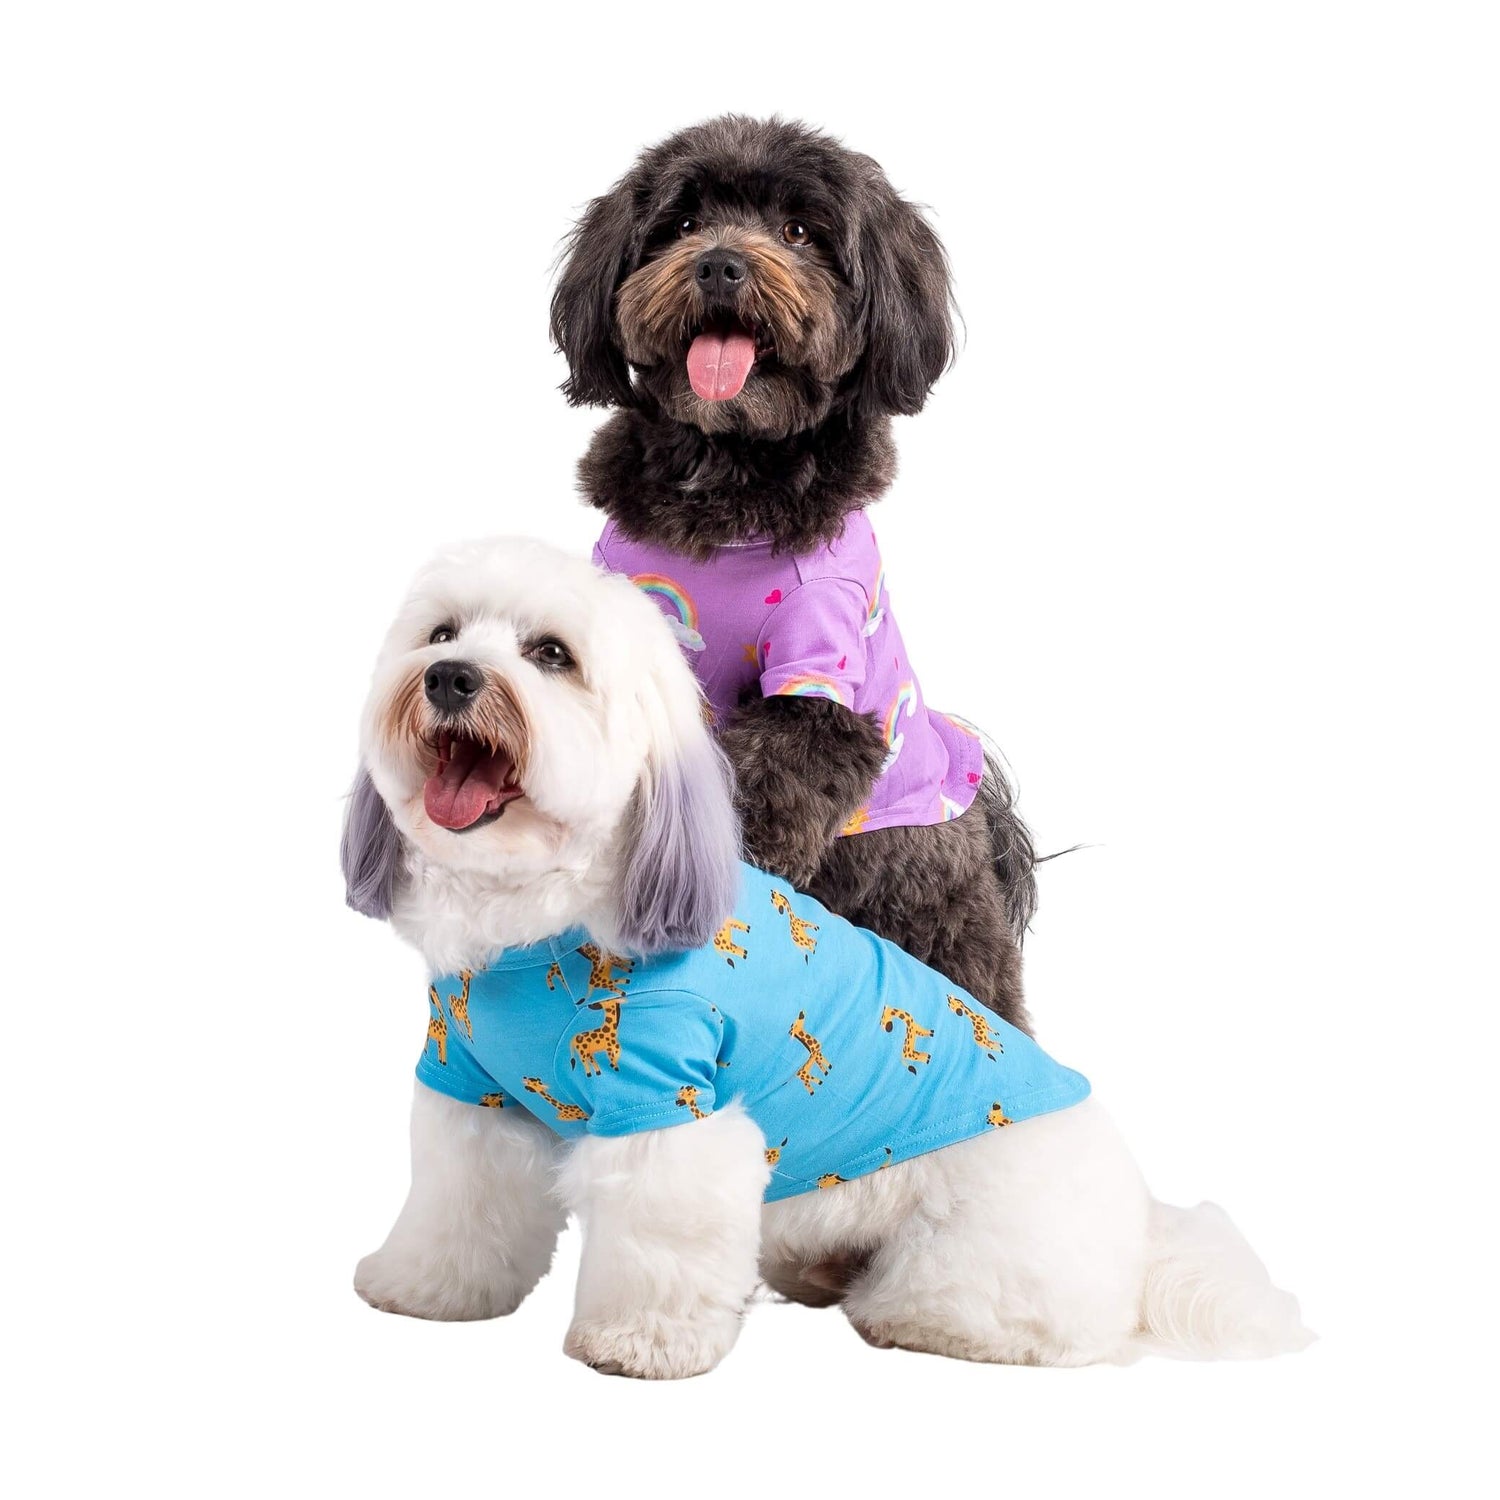 Two cavoodles wearing Gerald the Giraffe dog pyjamas made by Vibrant Hound. The dog pyjamas are blue, with girrafes printed on them.